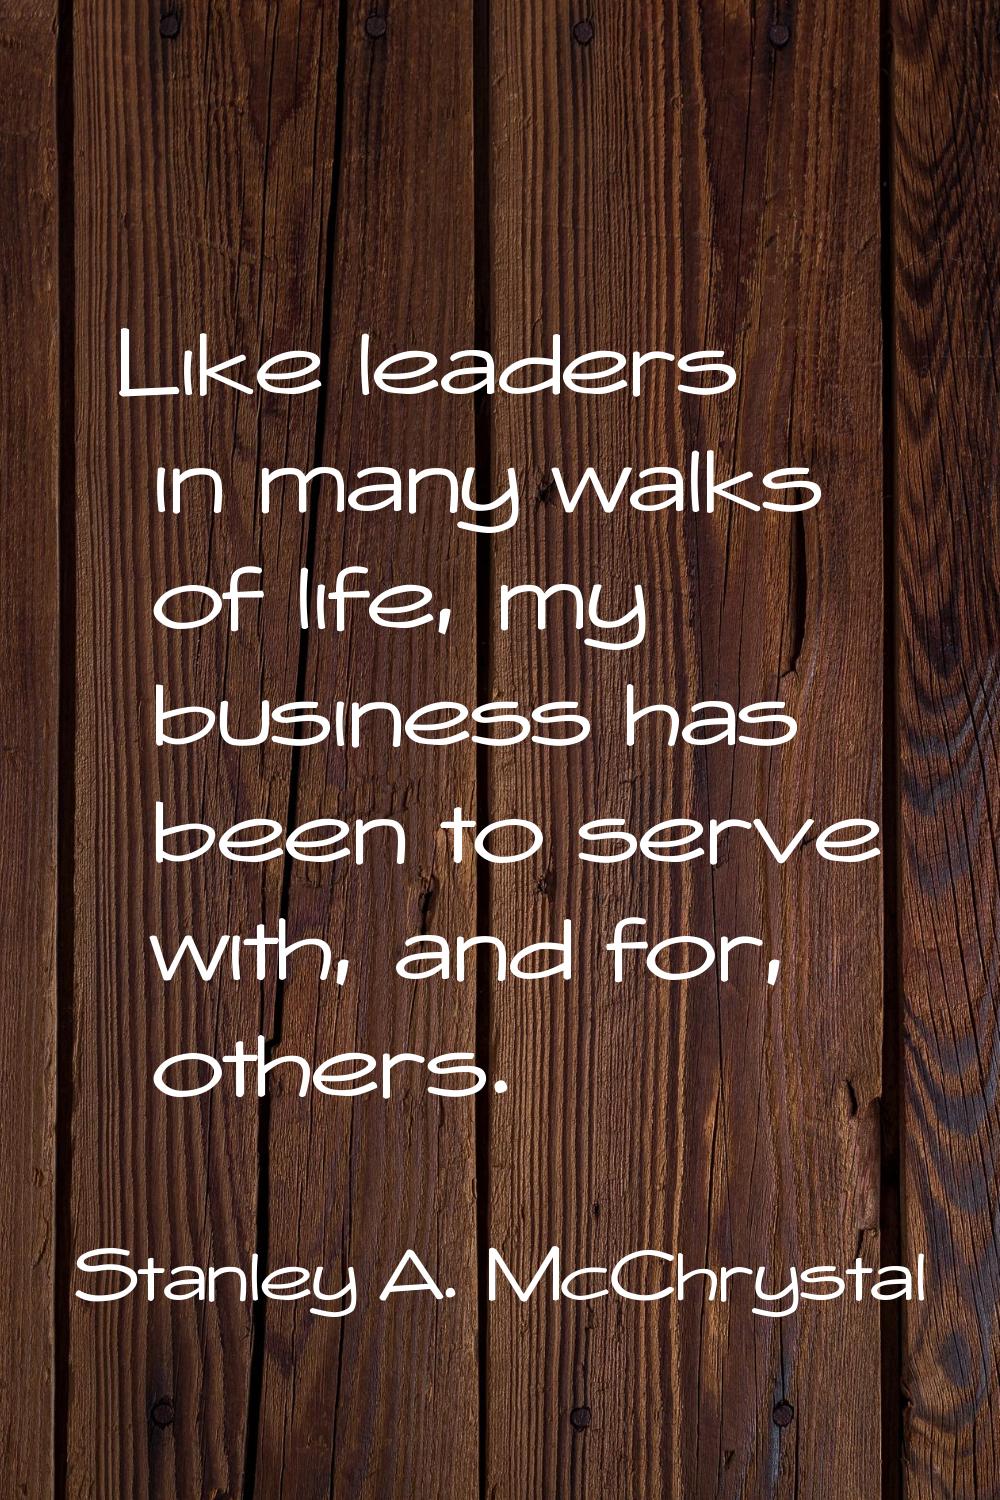 Like leaders in many walks of life, my business has been to serve with, and for, others.